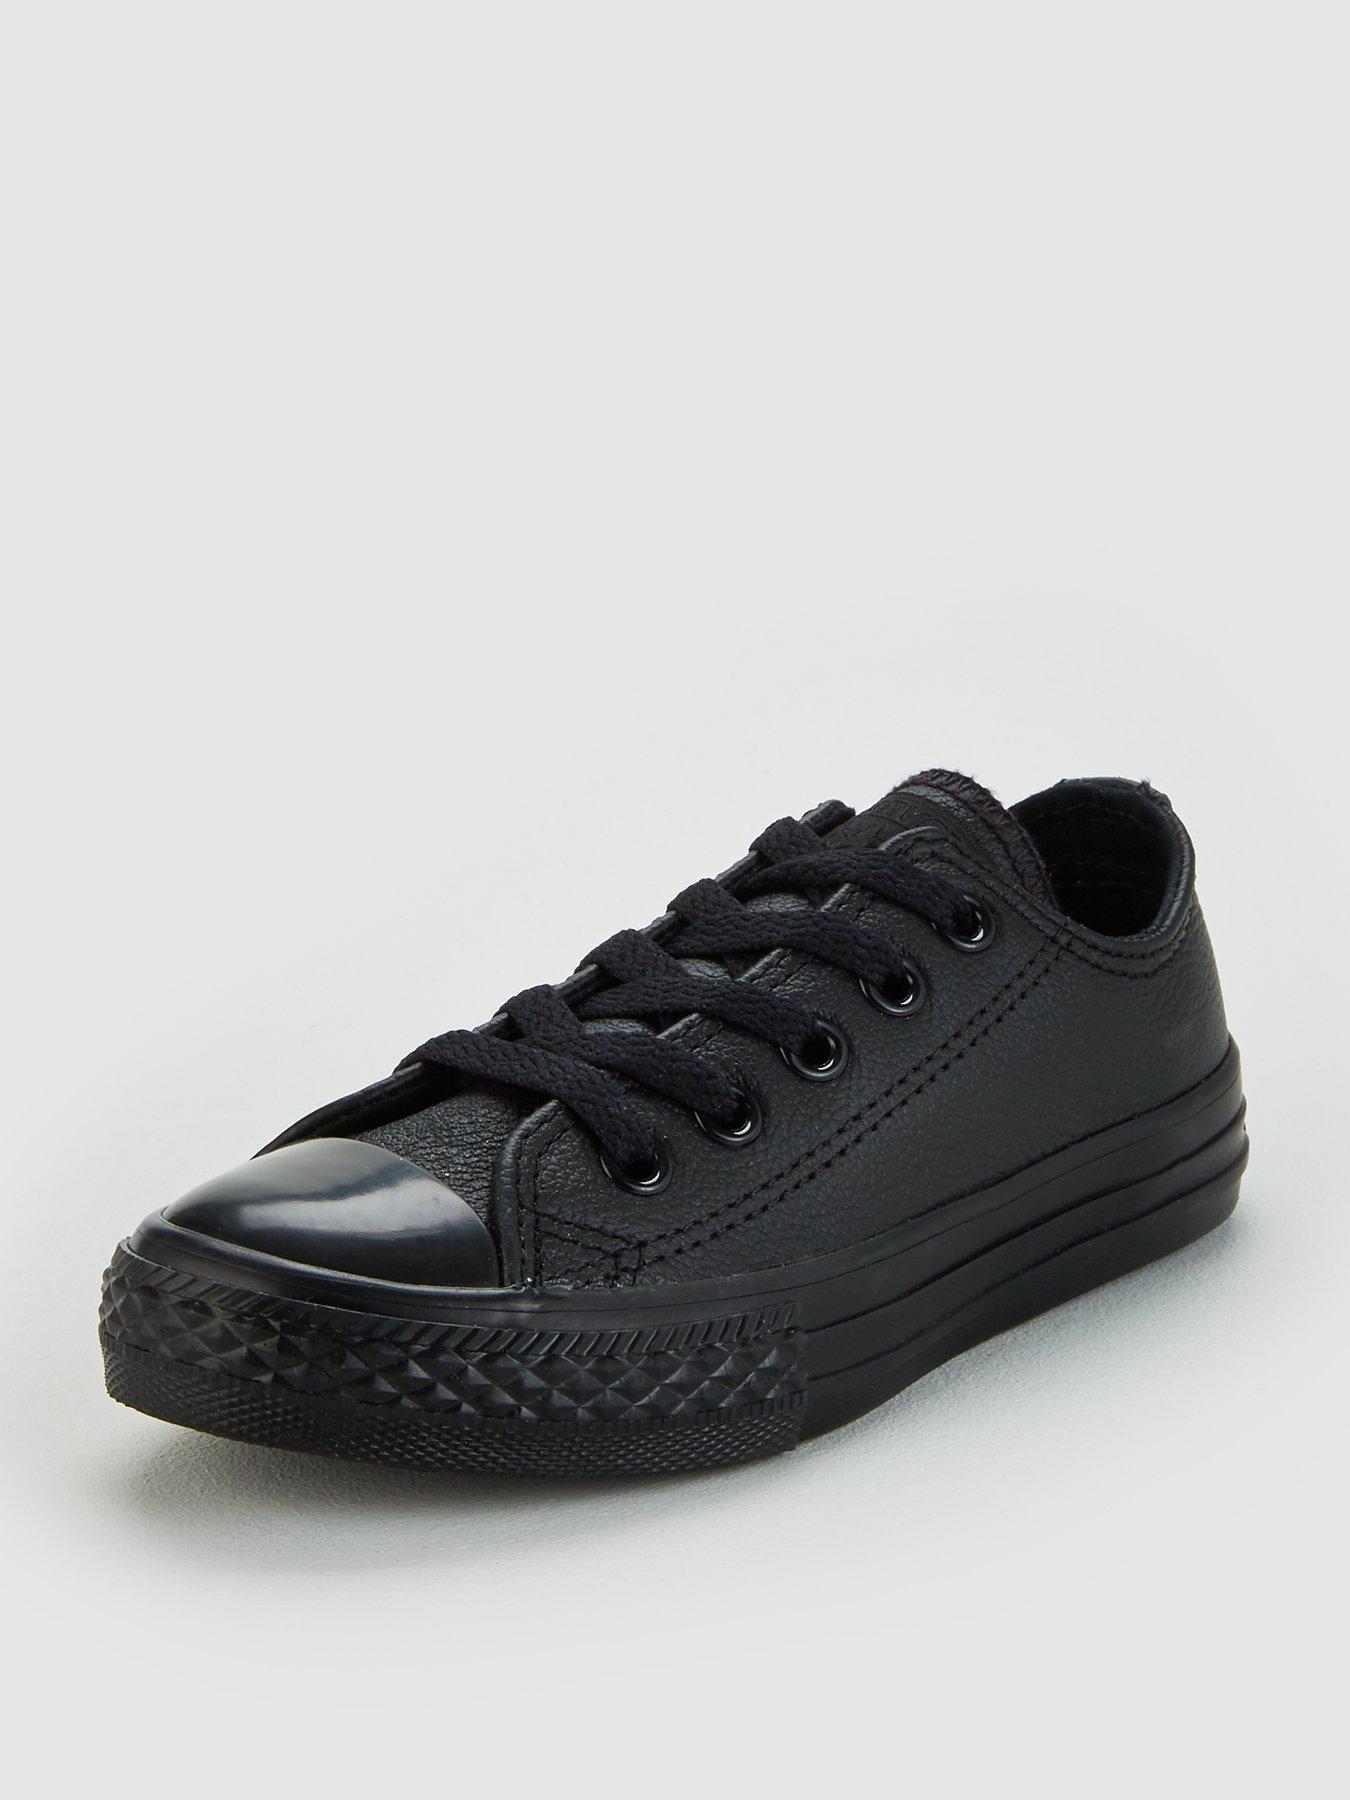 Star Leather Ox Children Shoes - Black 